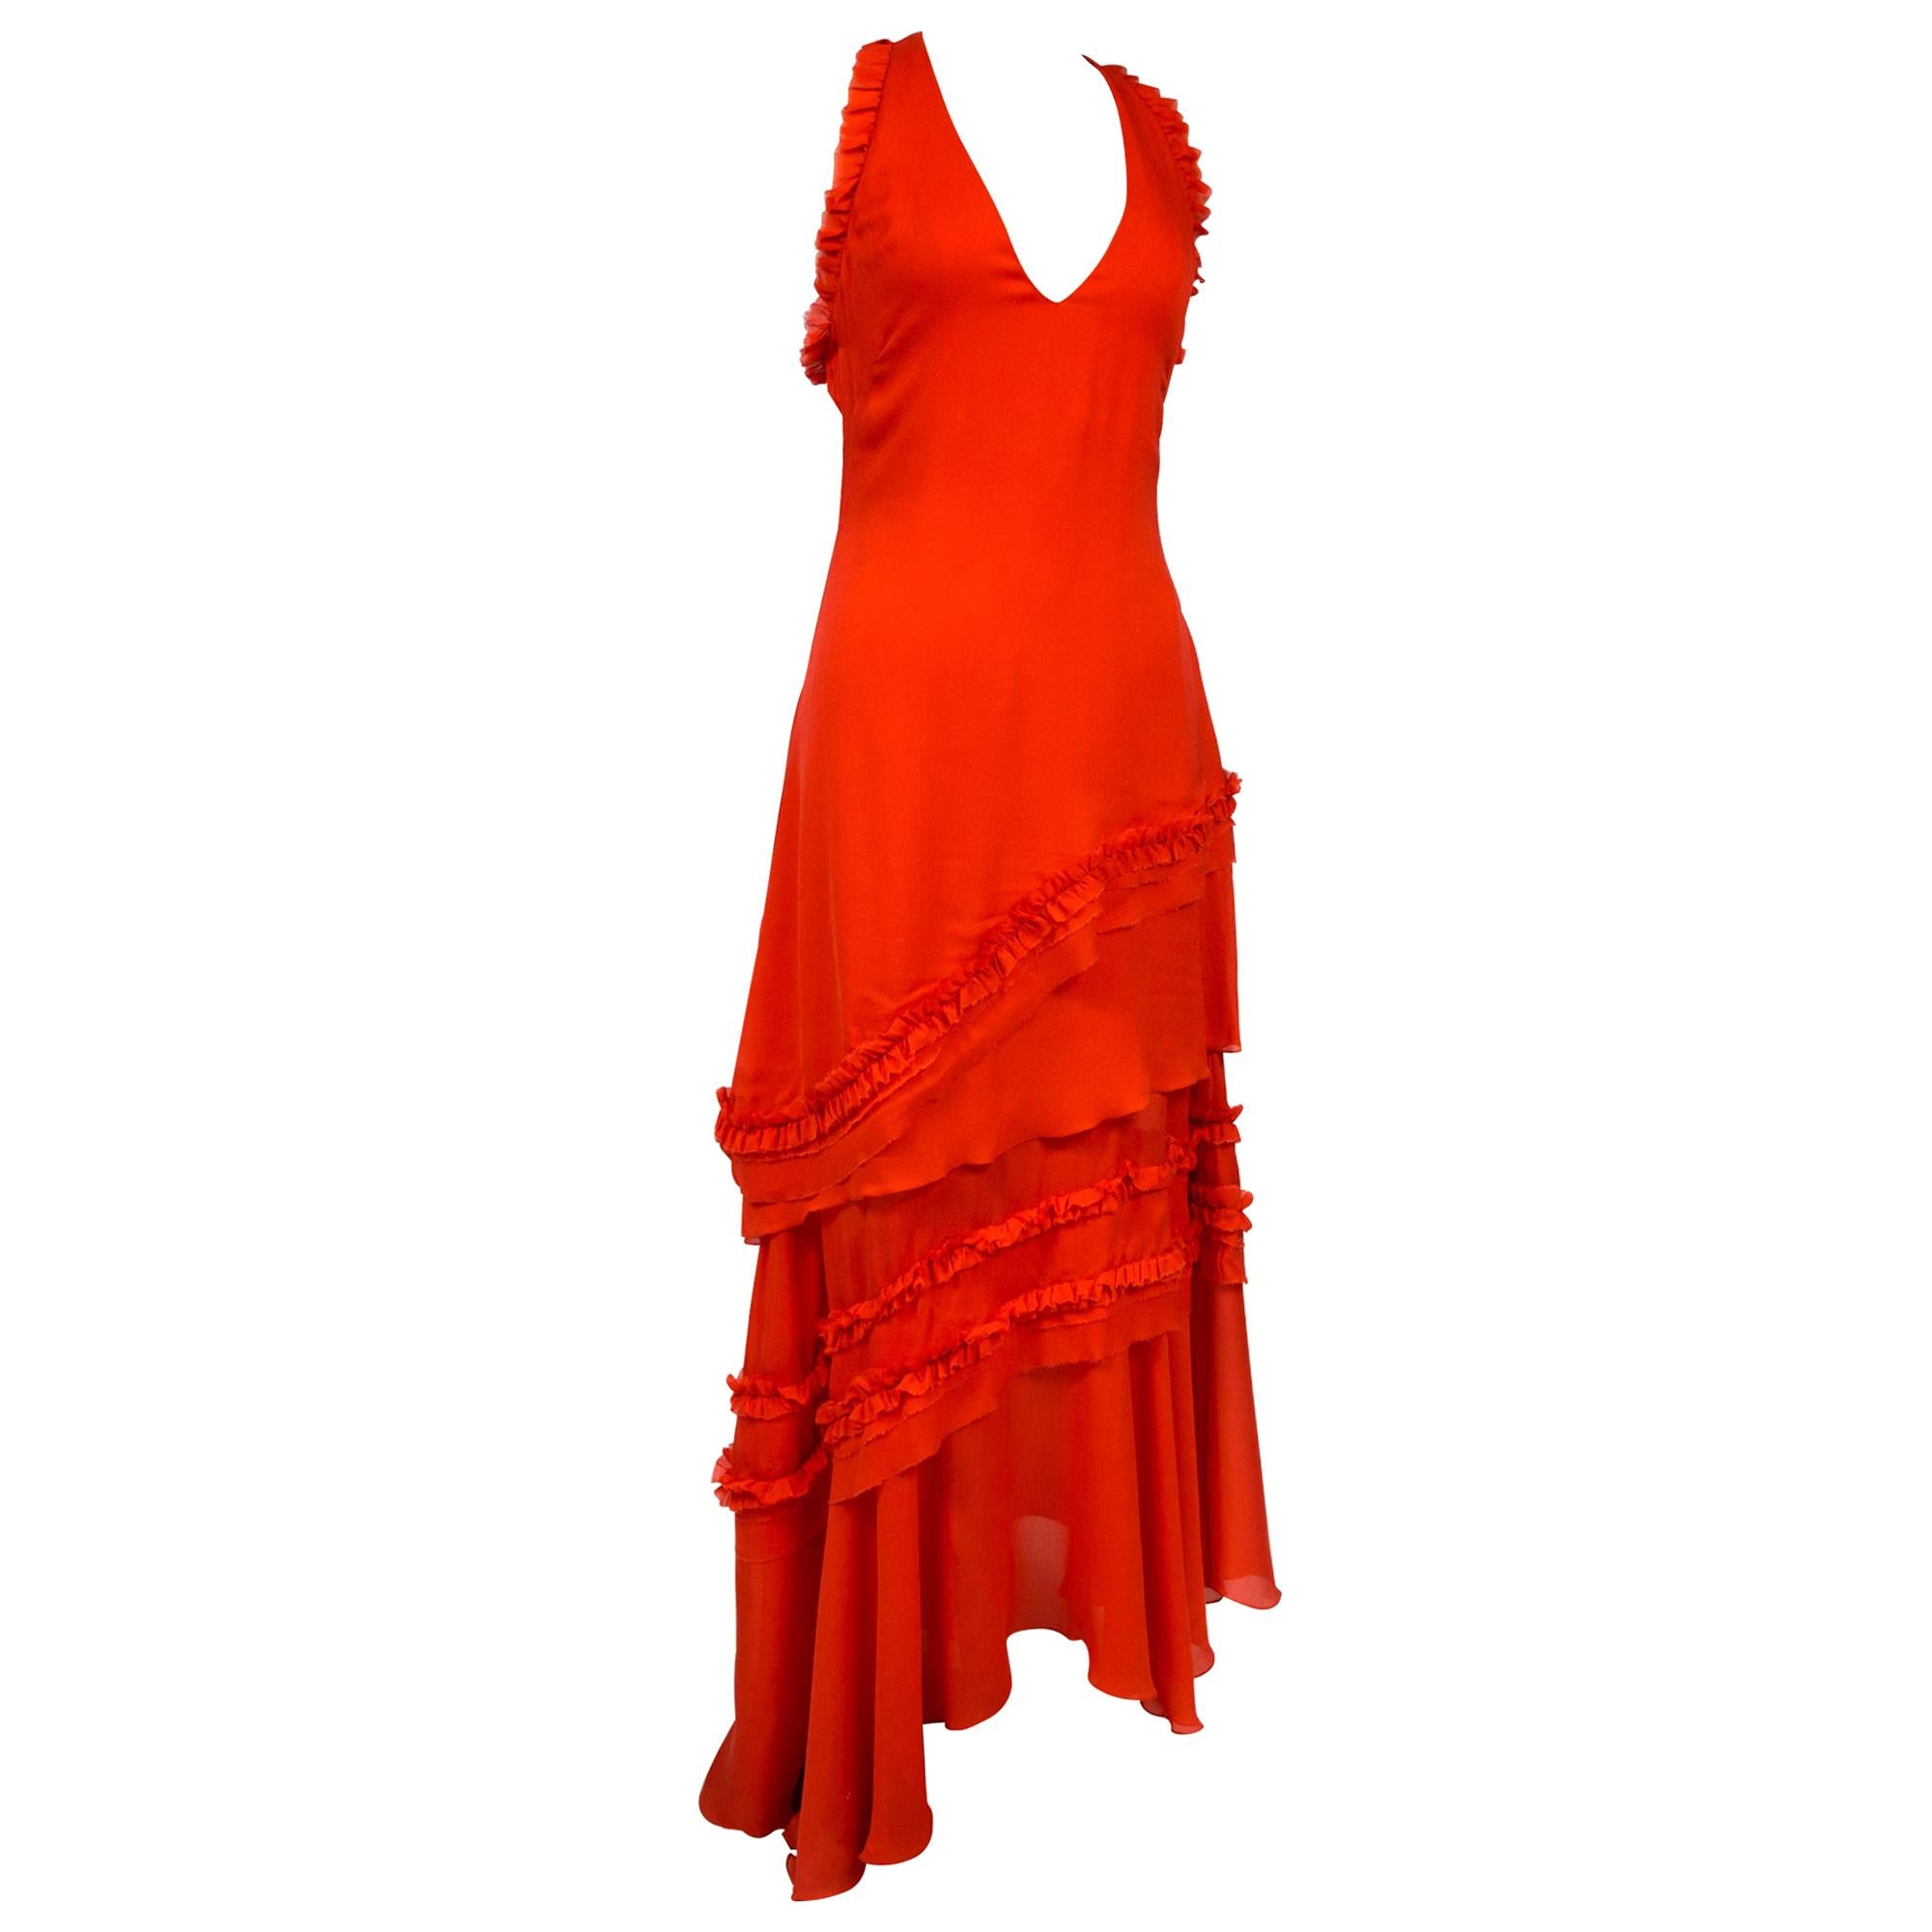 A Thierry Mugler Couture Evening Dress in Coral Silk Crepe Circa 1997/2002